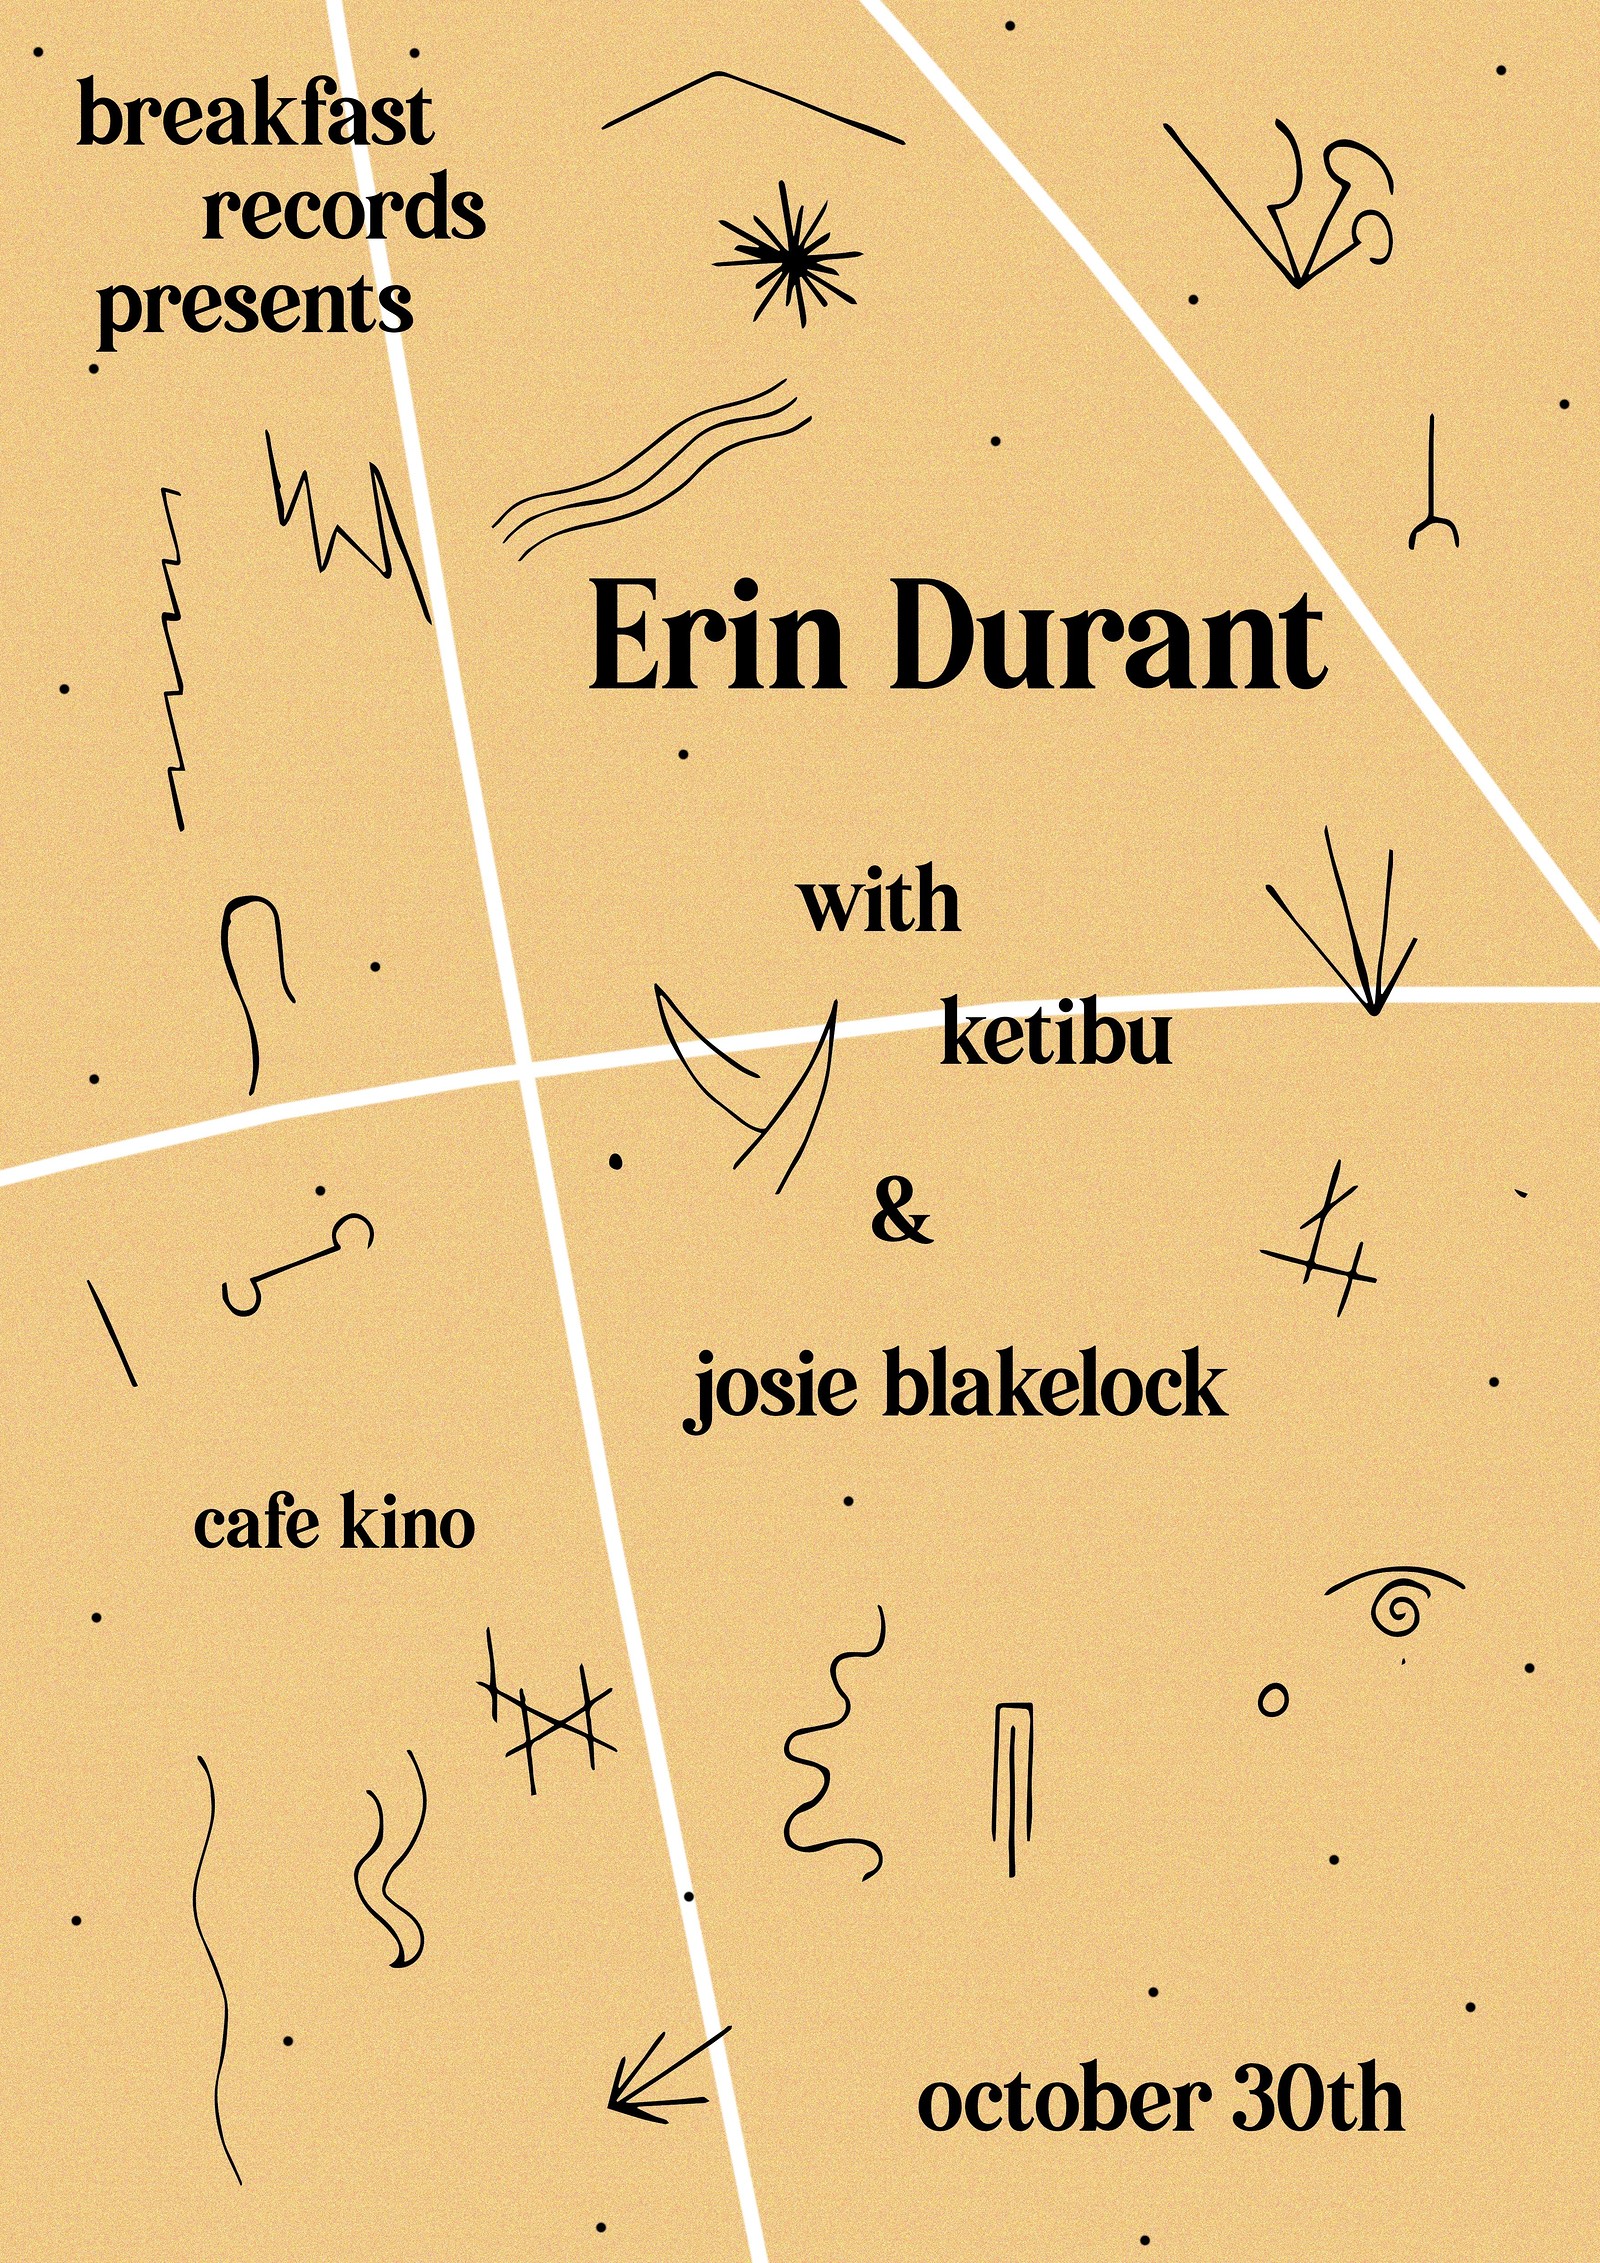 Erin Durant & Guests at Cafe Kino